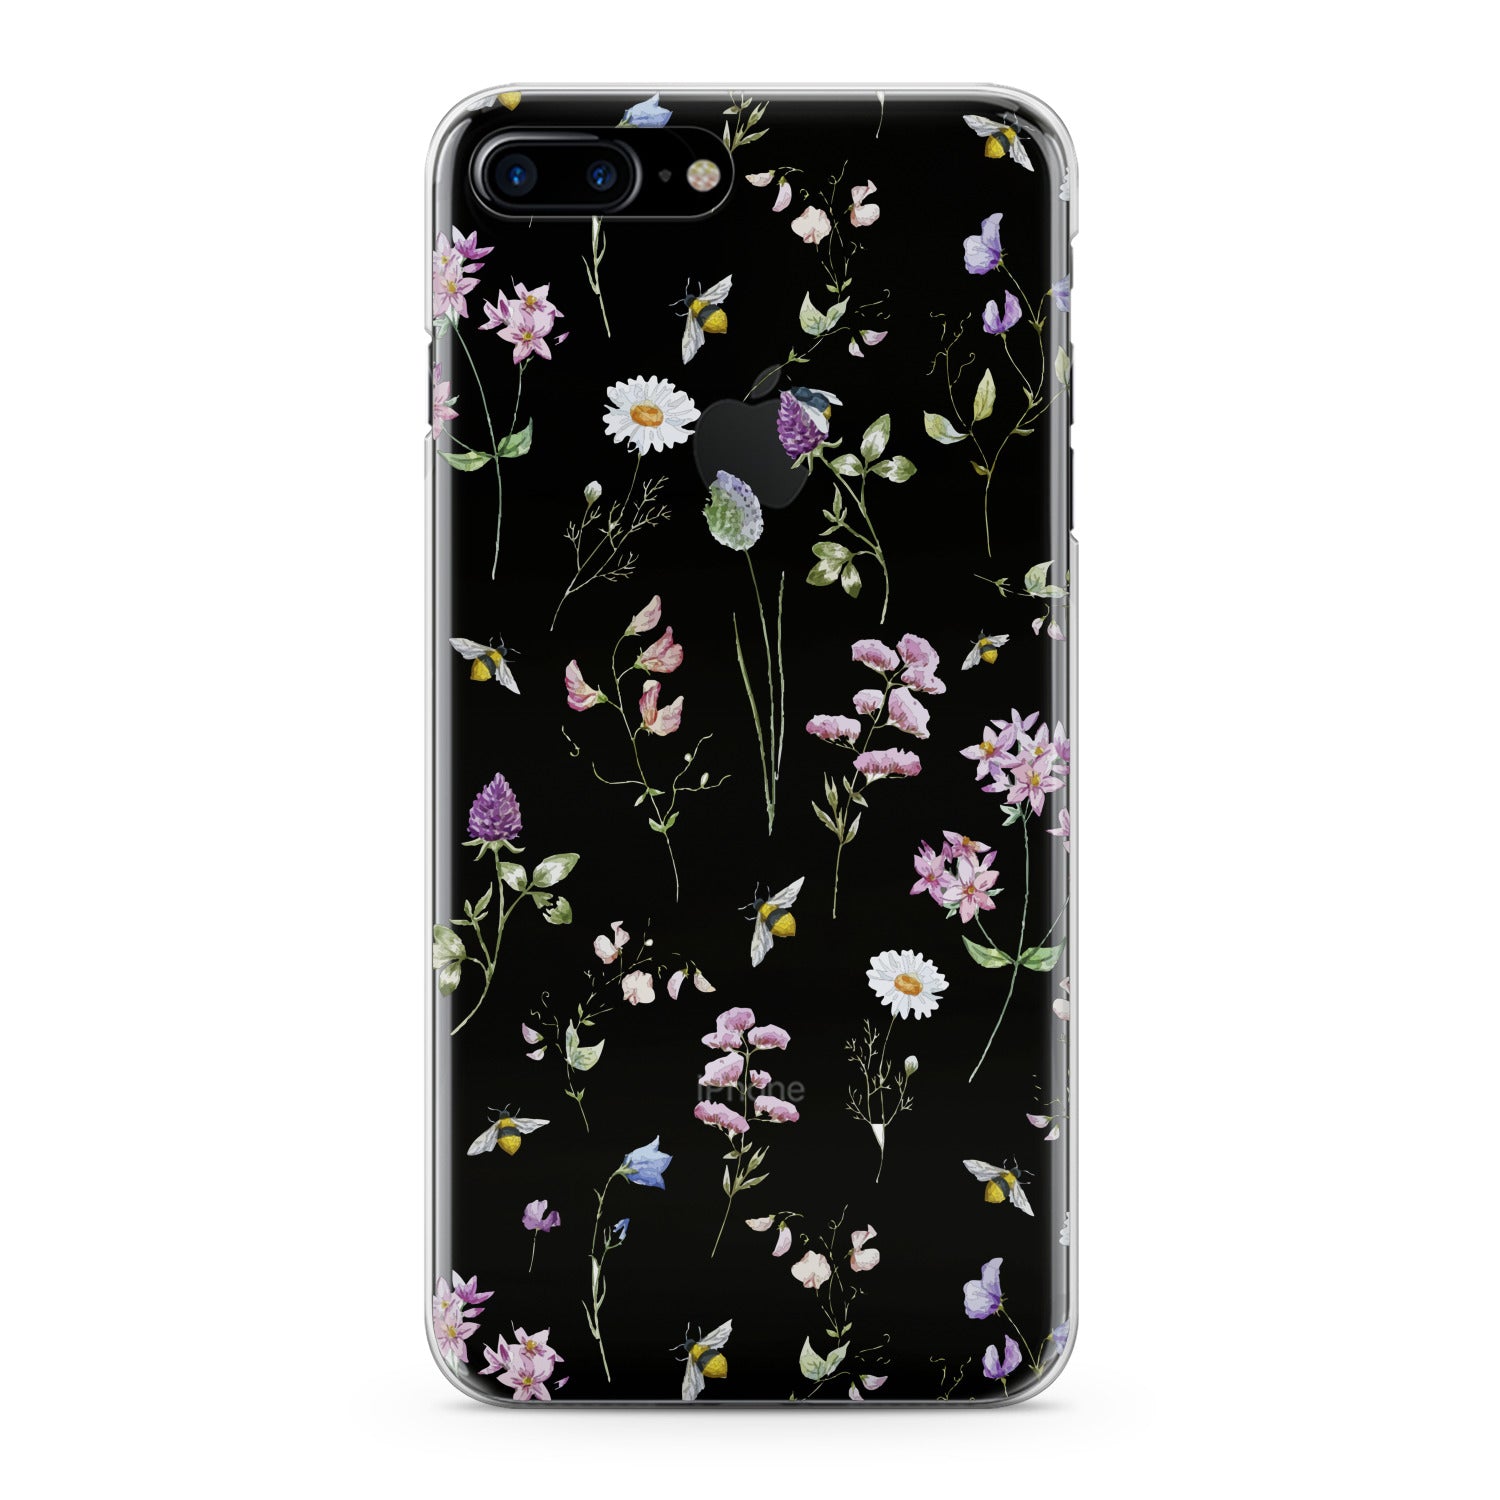 Lex Altern Wildflowers Theme Phone Case for your iPhone & Android phone.